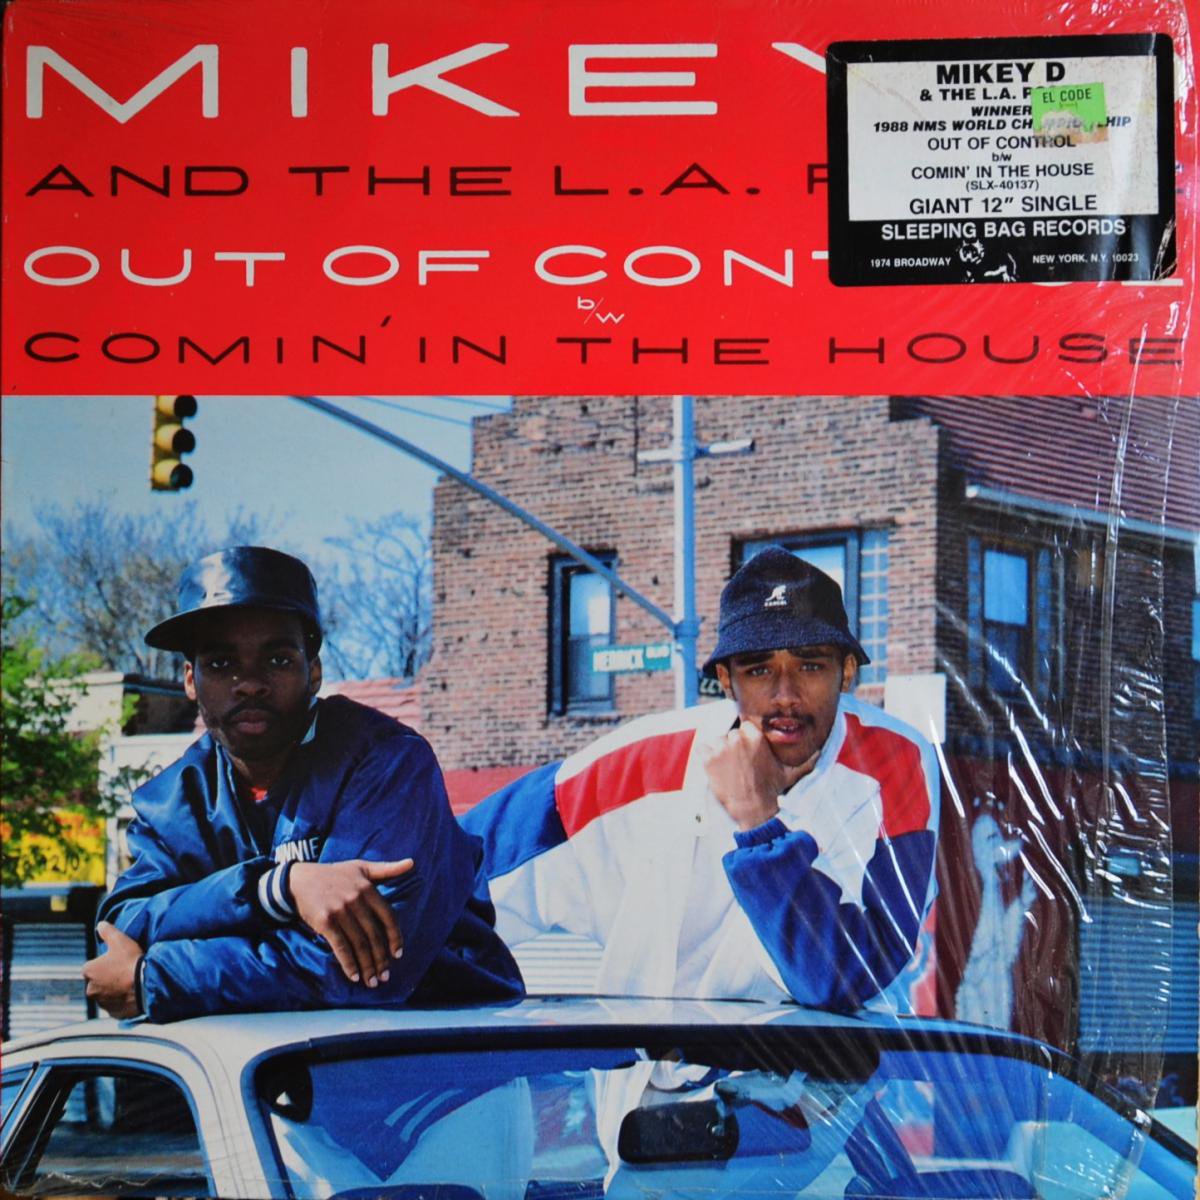 MIKEY D & THE L.A.POSSE / OUT OF CONTROL / COMIN' IN THE HOUSE (12